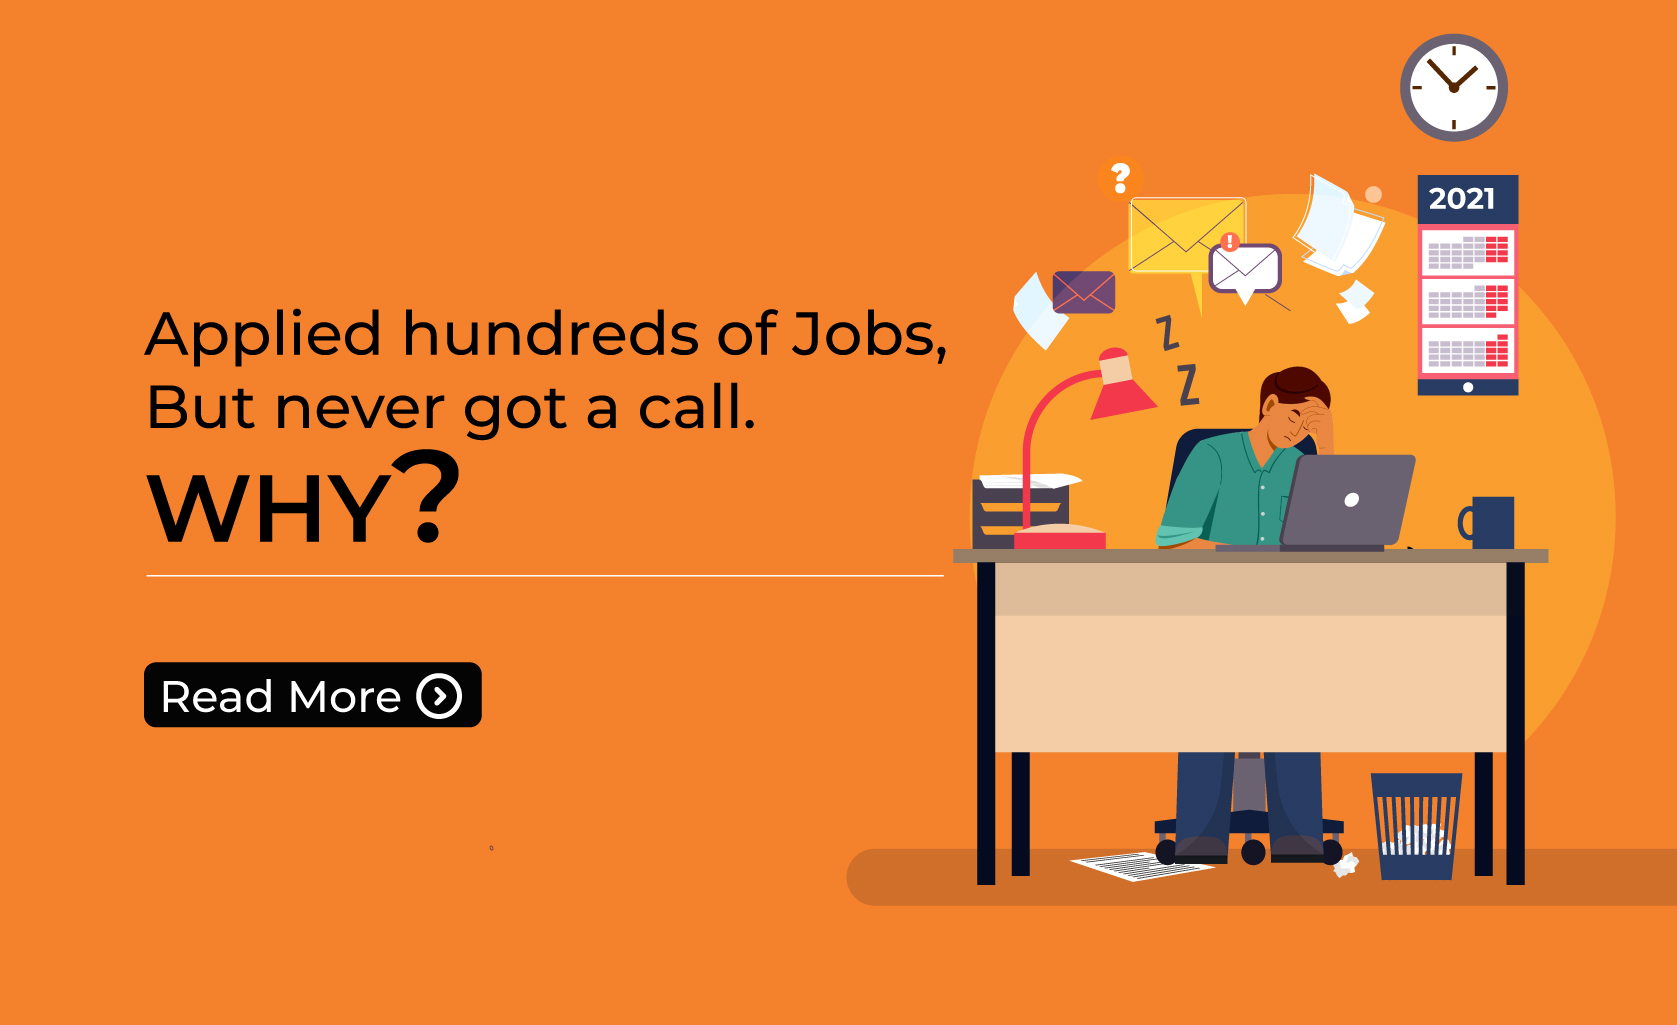 Applied hundreds of Jobs, but never got a call. WHY?